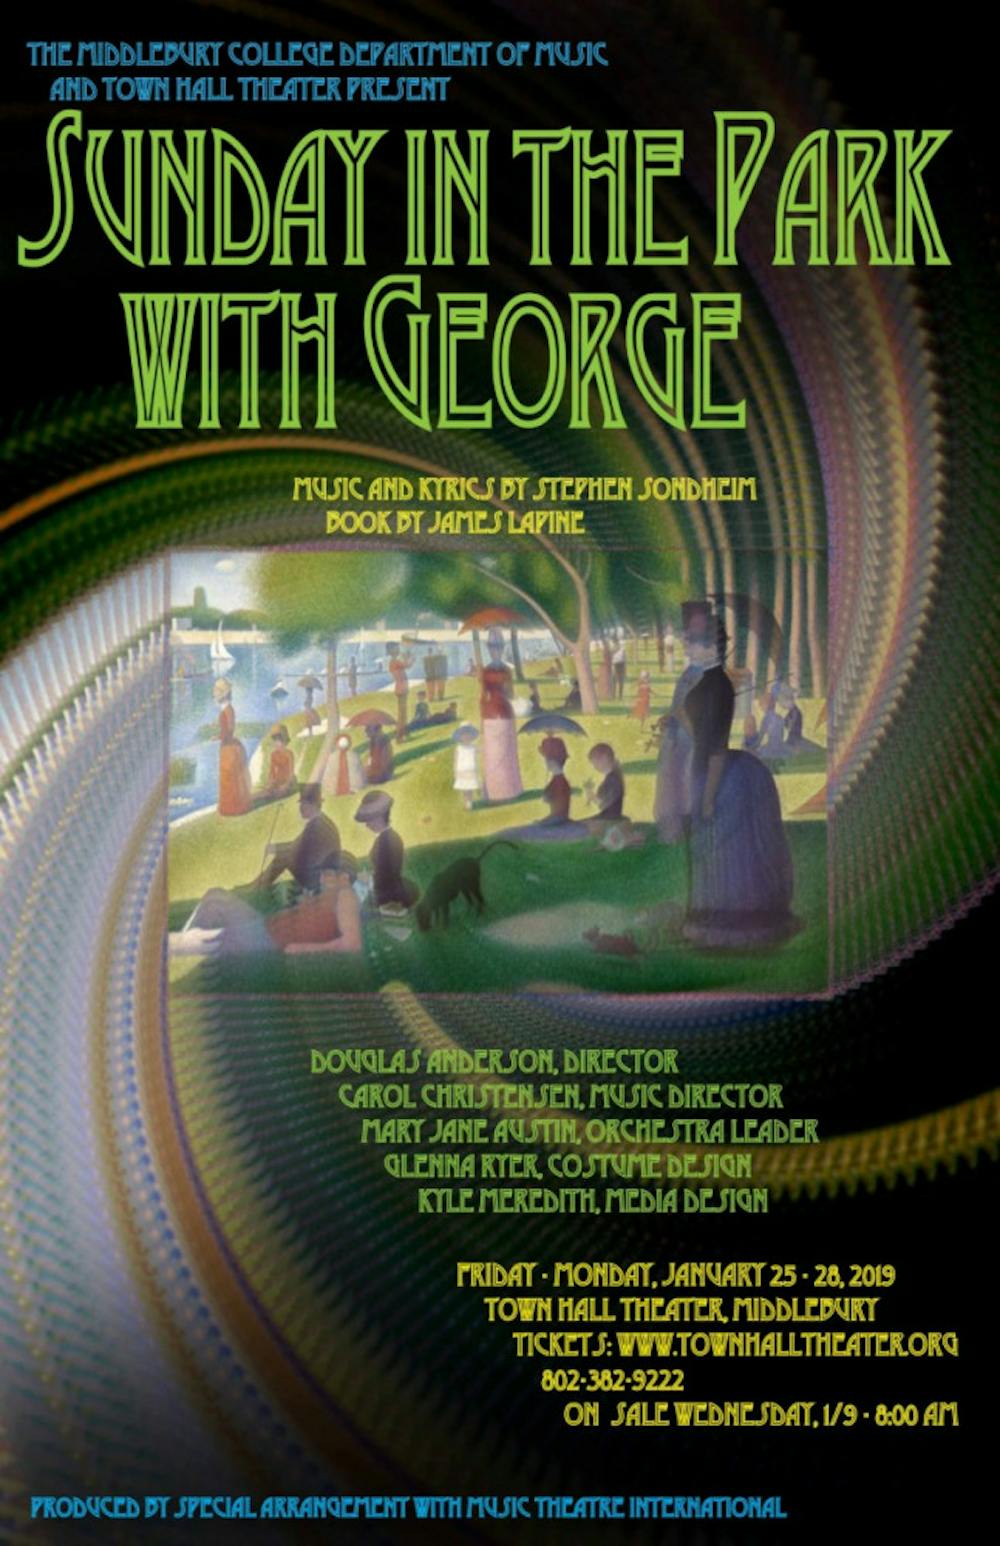 <span class="photocreditinline">COURTESY PHOTO</span><br />The J-term musical is based on the life of the artist Georges Seurat, and the creation of his famous painting “A Sunday Afternoon on the Island of Le Grande Jatte.”